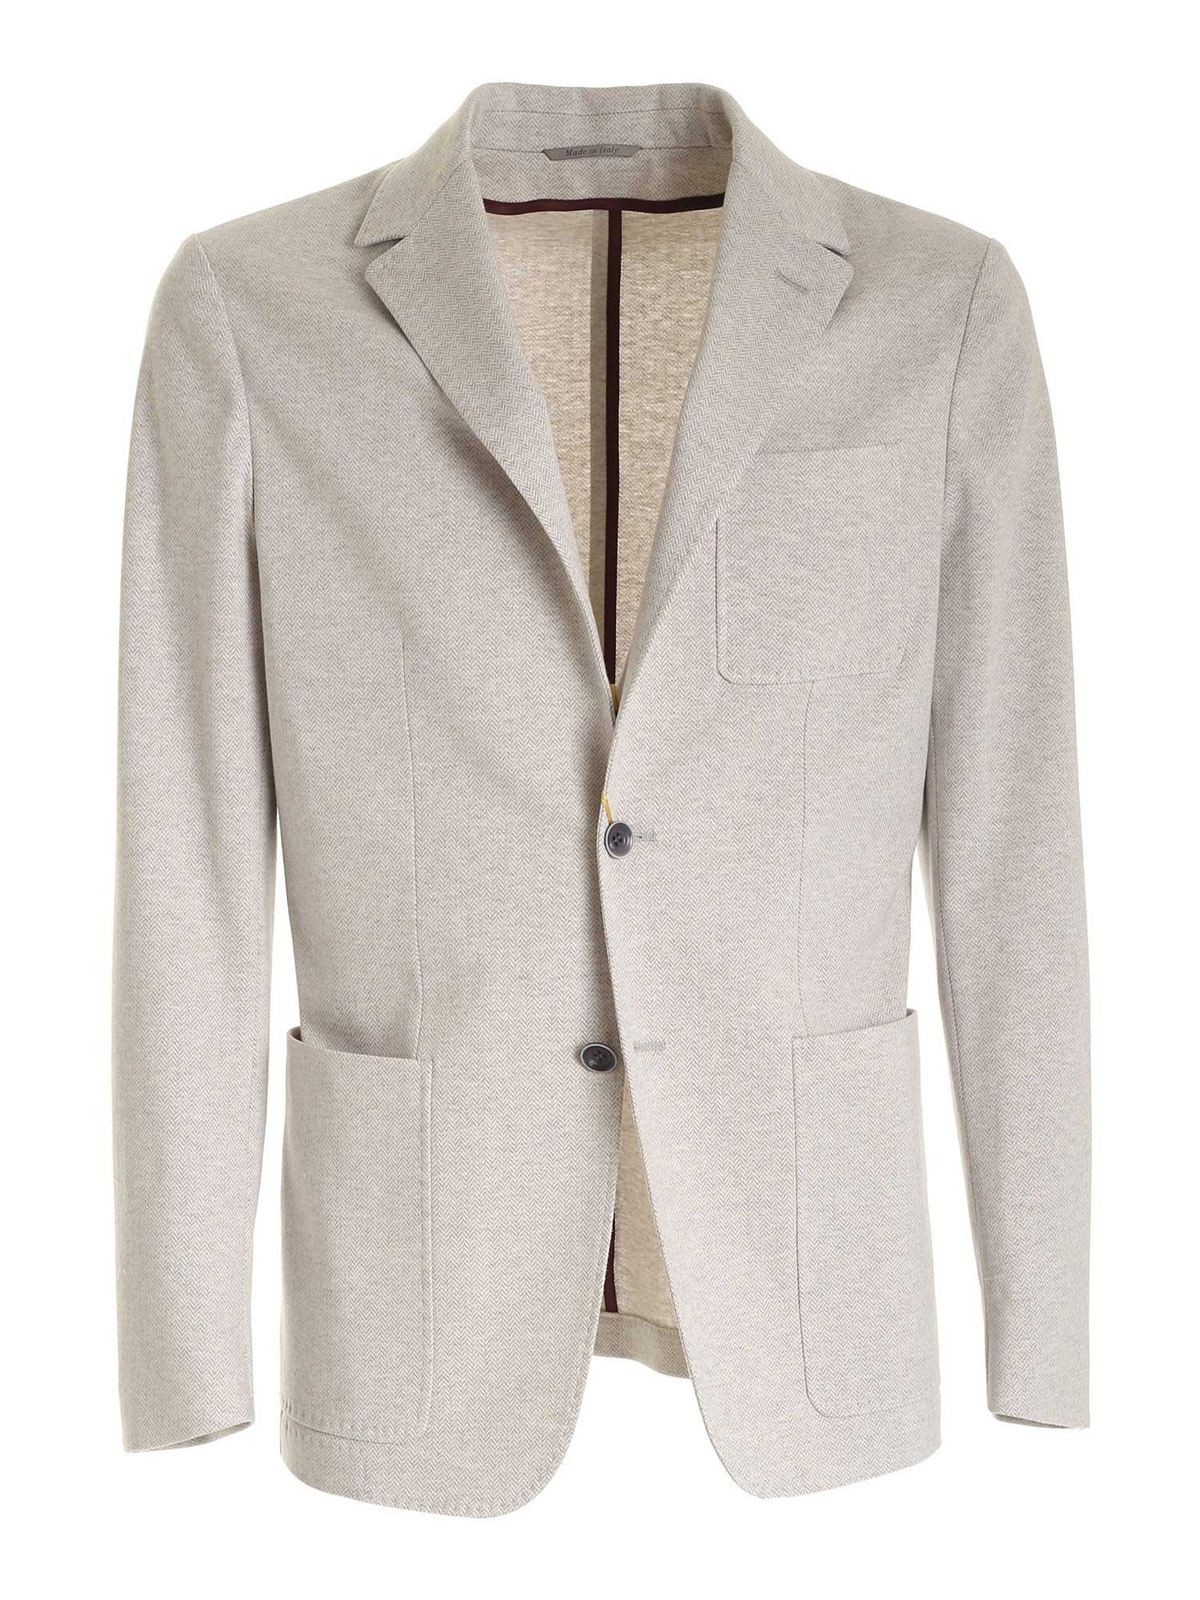 CANALI SINGLE-BREASTED JACKET IN GREY AND BEIGE